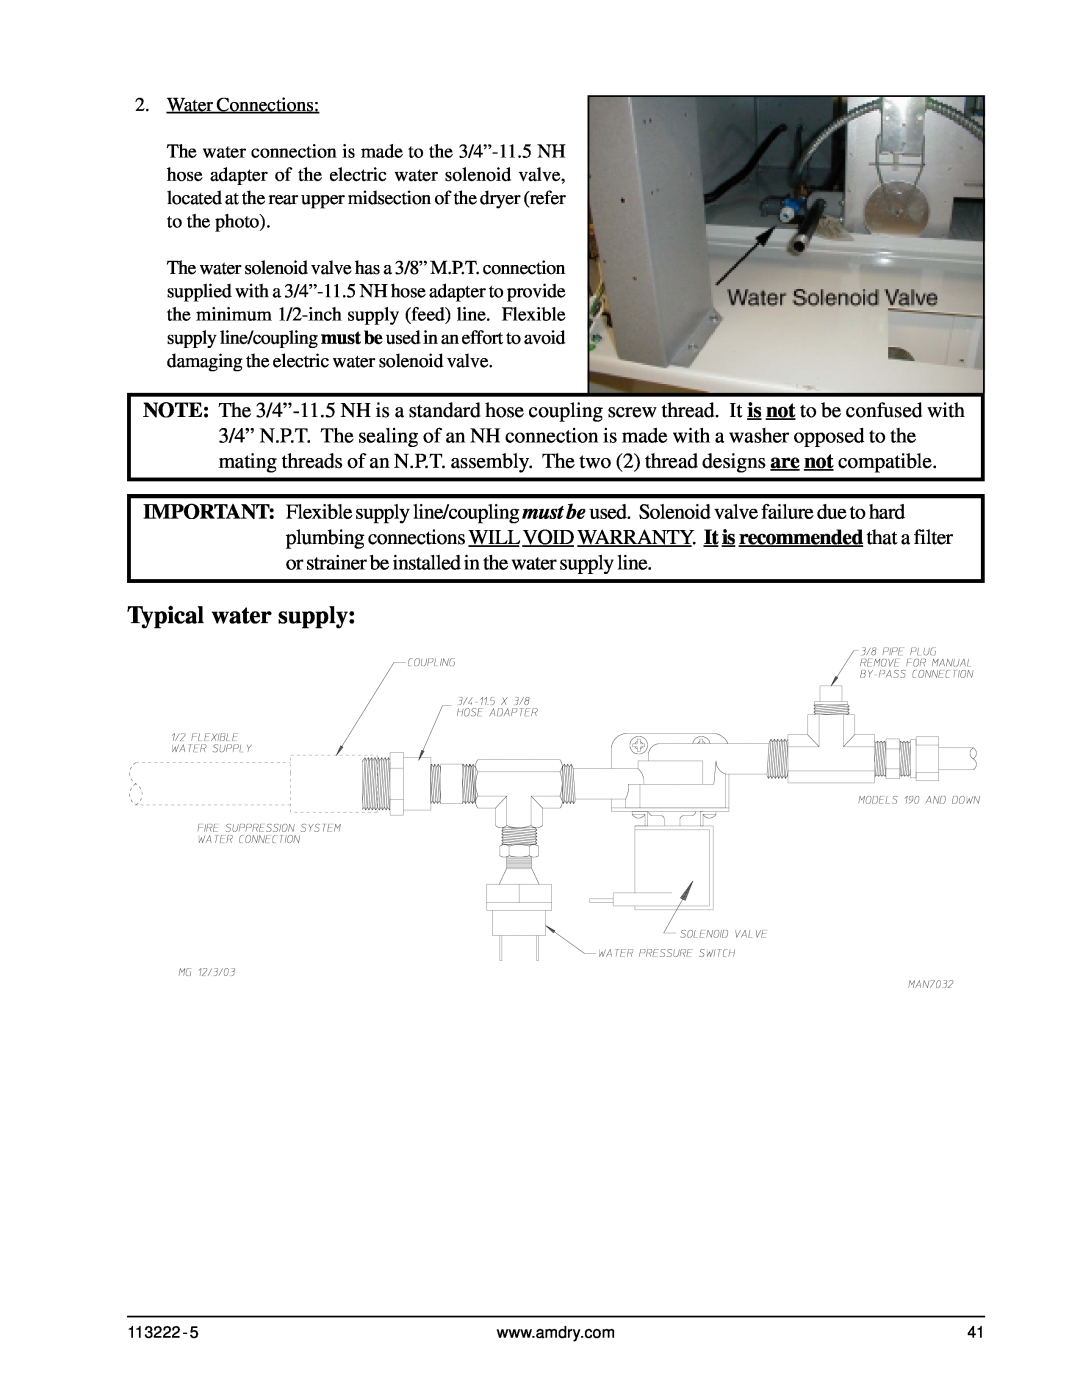 American Dryer Corp AD-24 Phase 7 installation manual Typical water supply, Water Connections 